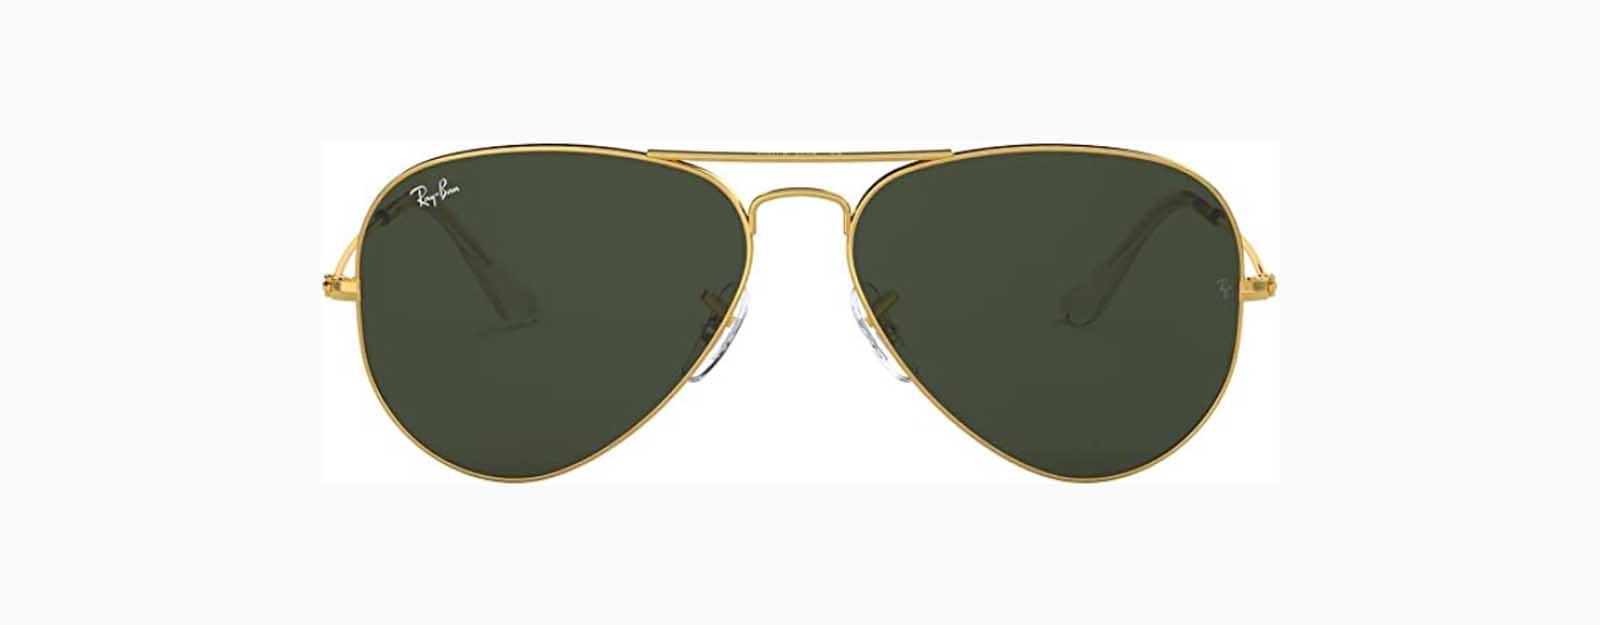 what to pack for alaska cruise aviator sunglasses by rayban